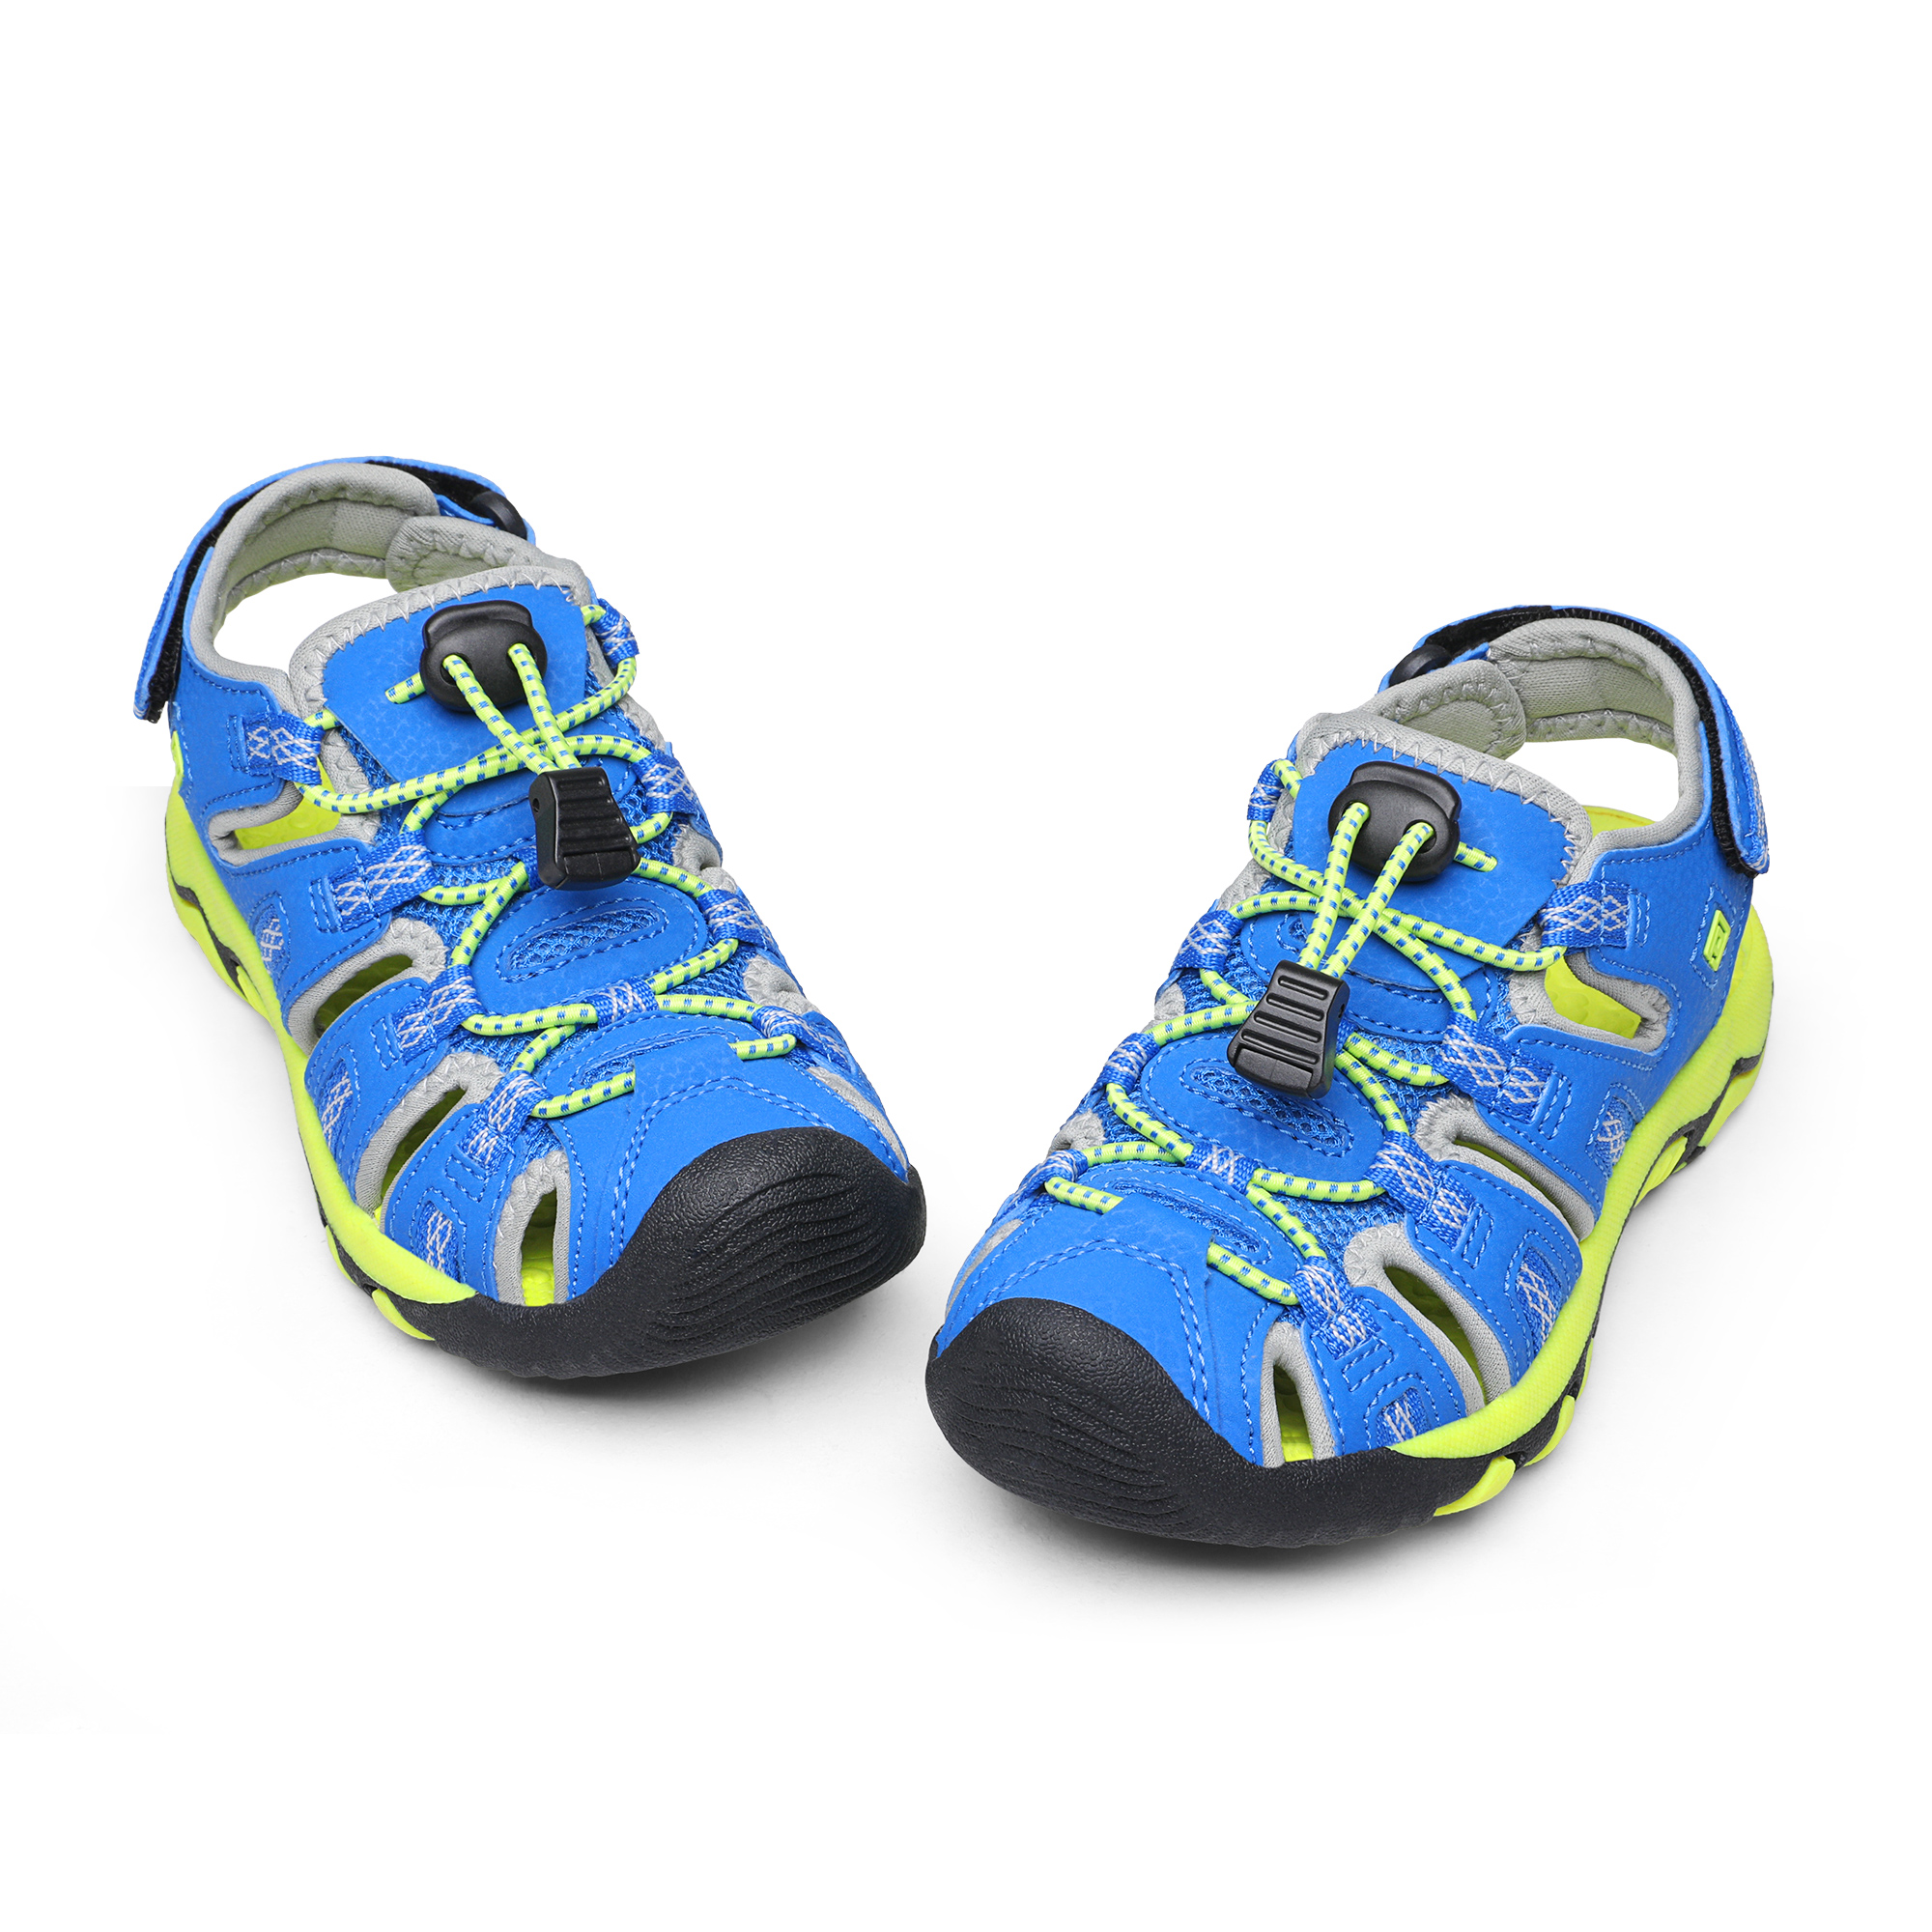 Dream Pairs Kids Summer Athletic Sandals Boys Girls School Outdoor Sports Sandals Walking Shoes 160912-K ROYAL/BLUE/GREY/NEON/GREEN Size 9 - image 5 of 5